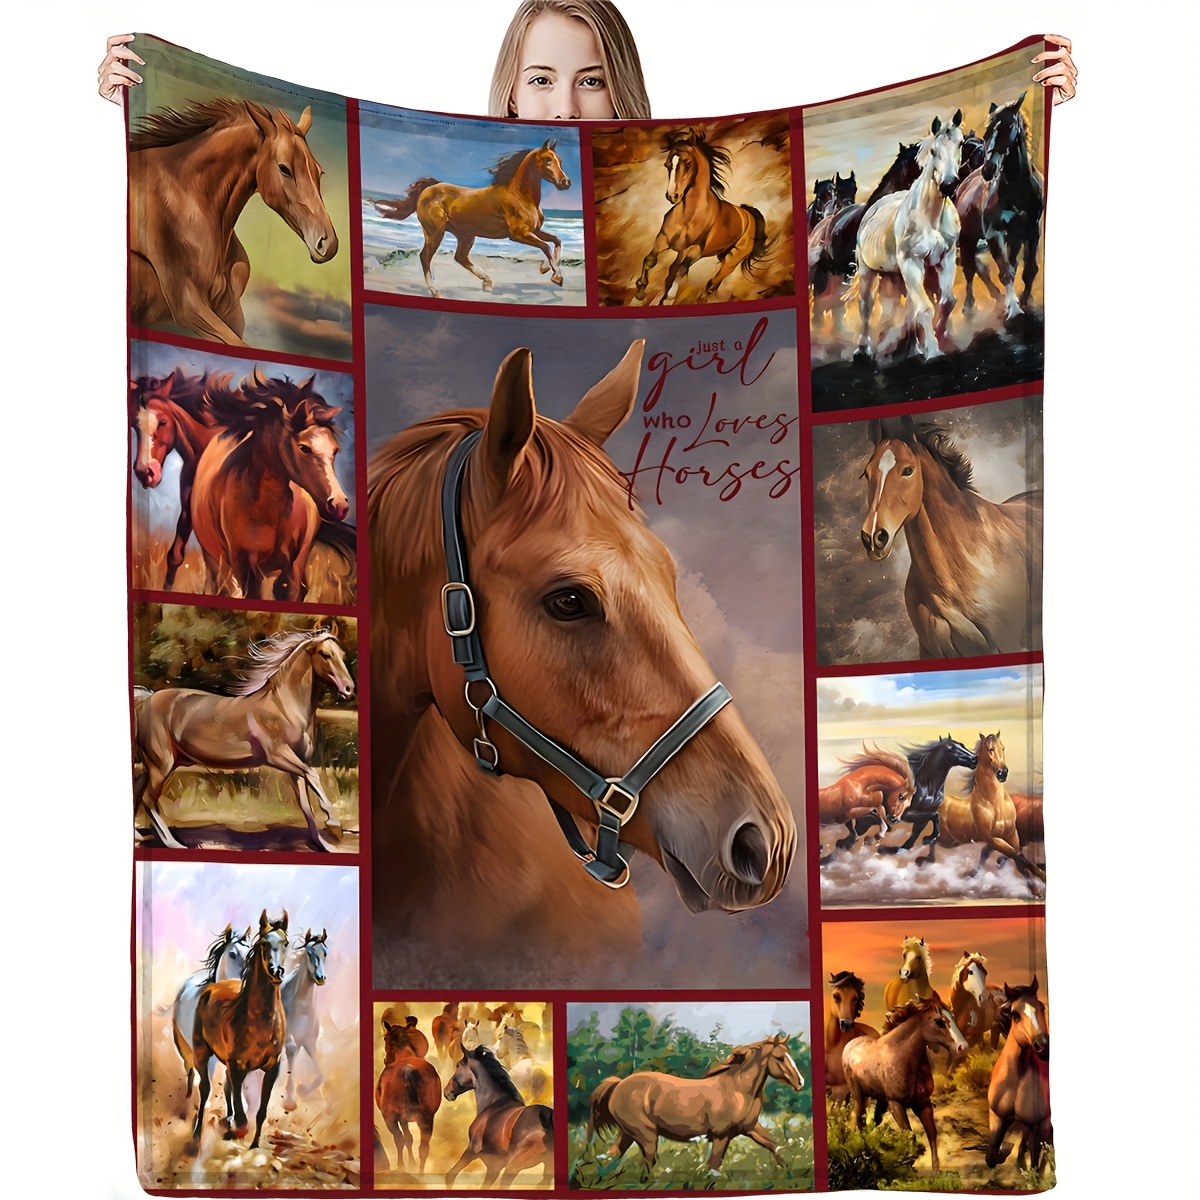 

1pc Horse Blanket, Horse Gifts For Girls Throw Blanket, Horse Gifts For Women Blanket, Gifts For Horse Lovers, Super Soft Cozy Horse Themed Gifts For Men Blanket, Sofa Couch Beds Horse Decor